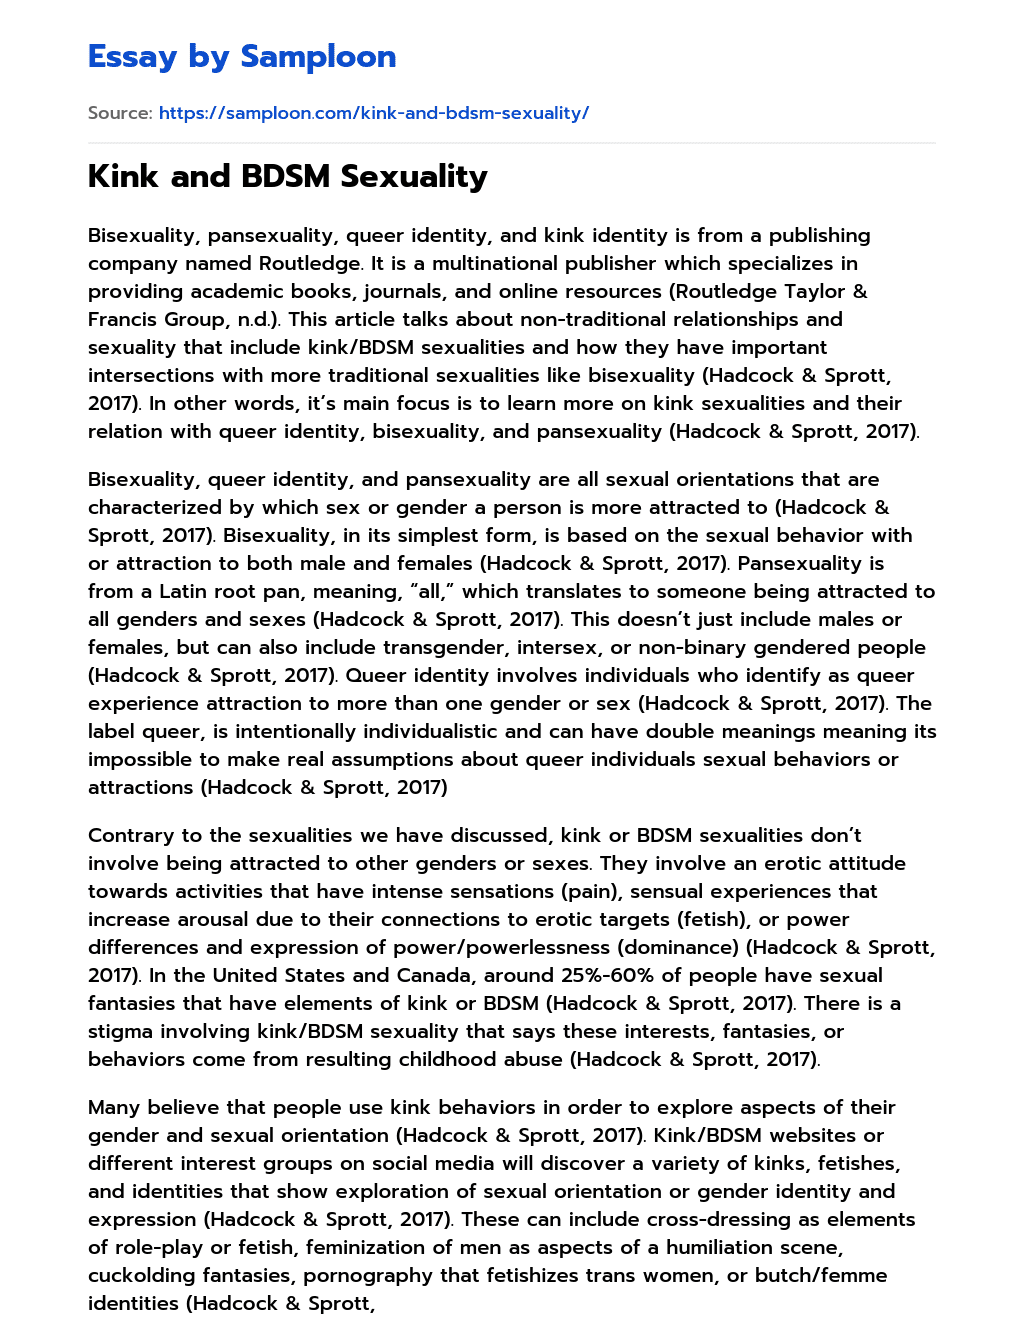 Kink and BDSM Sexuality essay